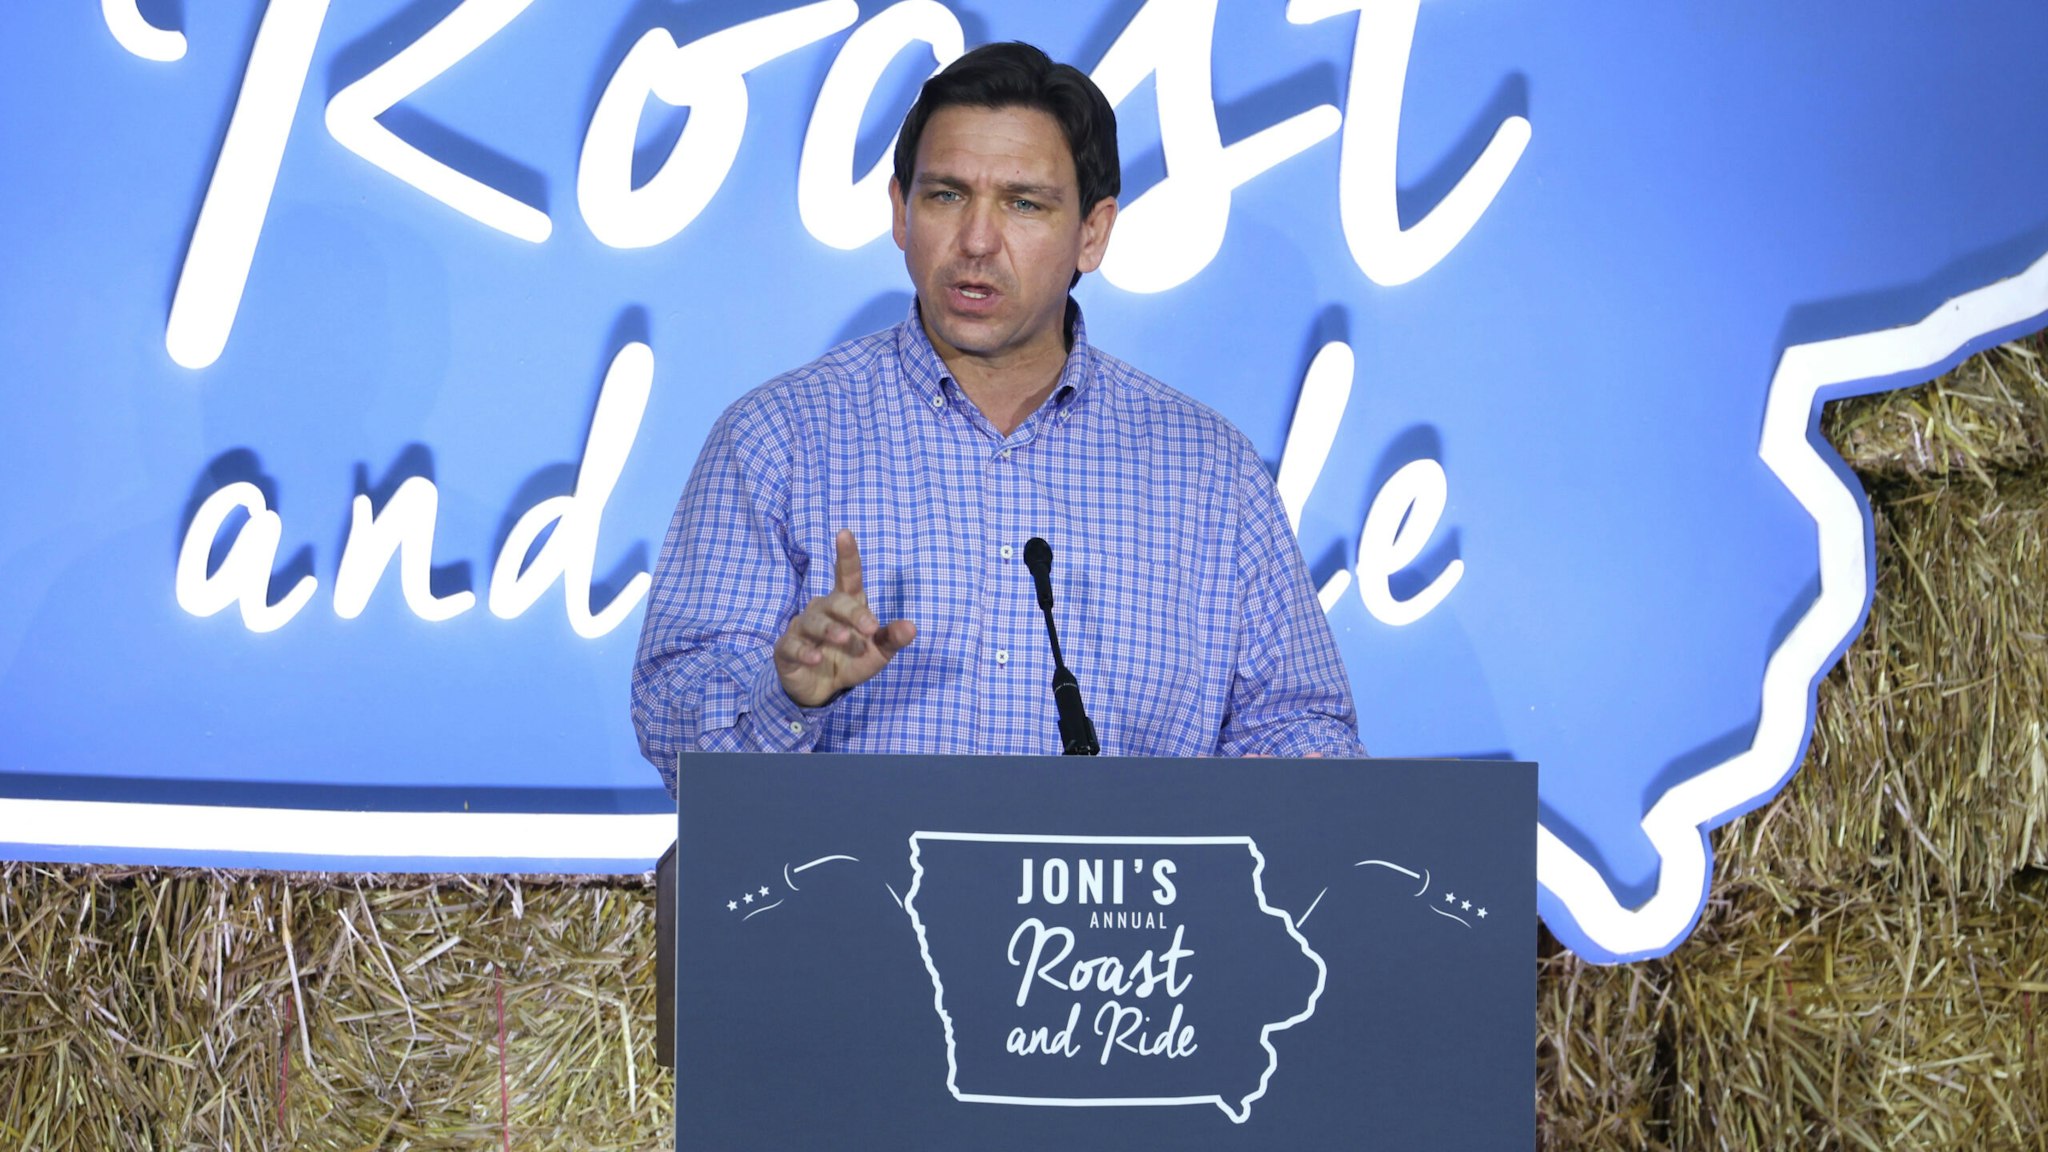 DES MOINES, IOWA - JUNE 03: Republican presidential candidate Florida Gov. Ron DeSantis speaks to guests during the Joni Ernst's Roast and Ride event on June 03, 2023 in Des Moines, Iowa. The annual event helps to raise money for veteran charities and highlights Republican candidates and platforms.